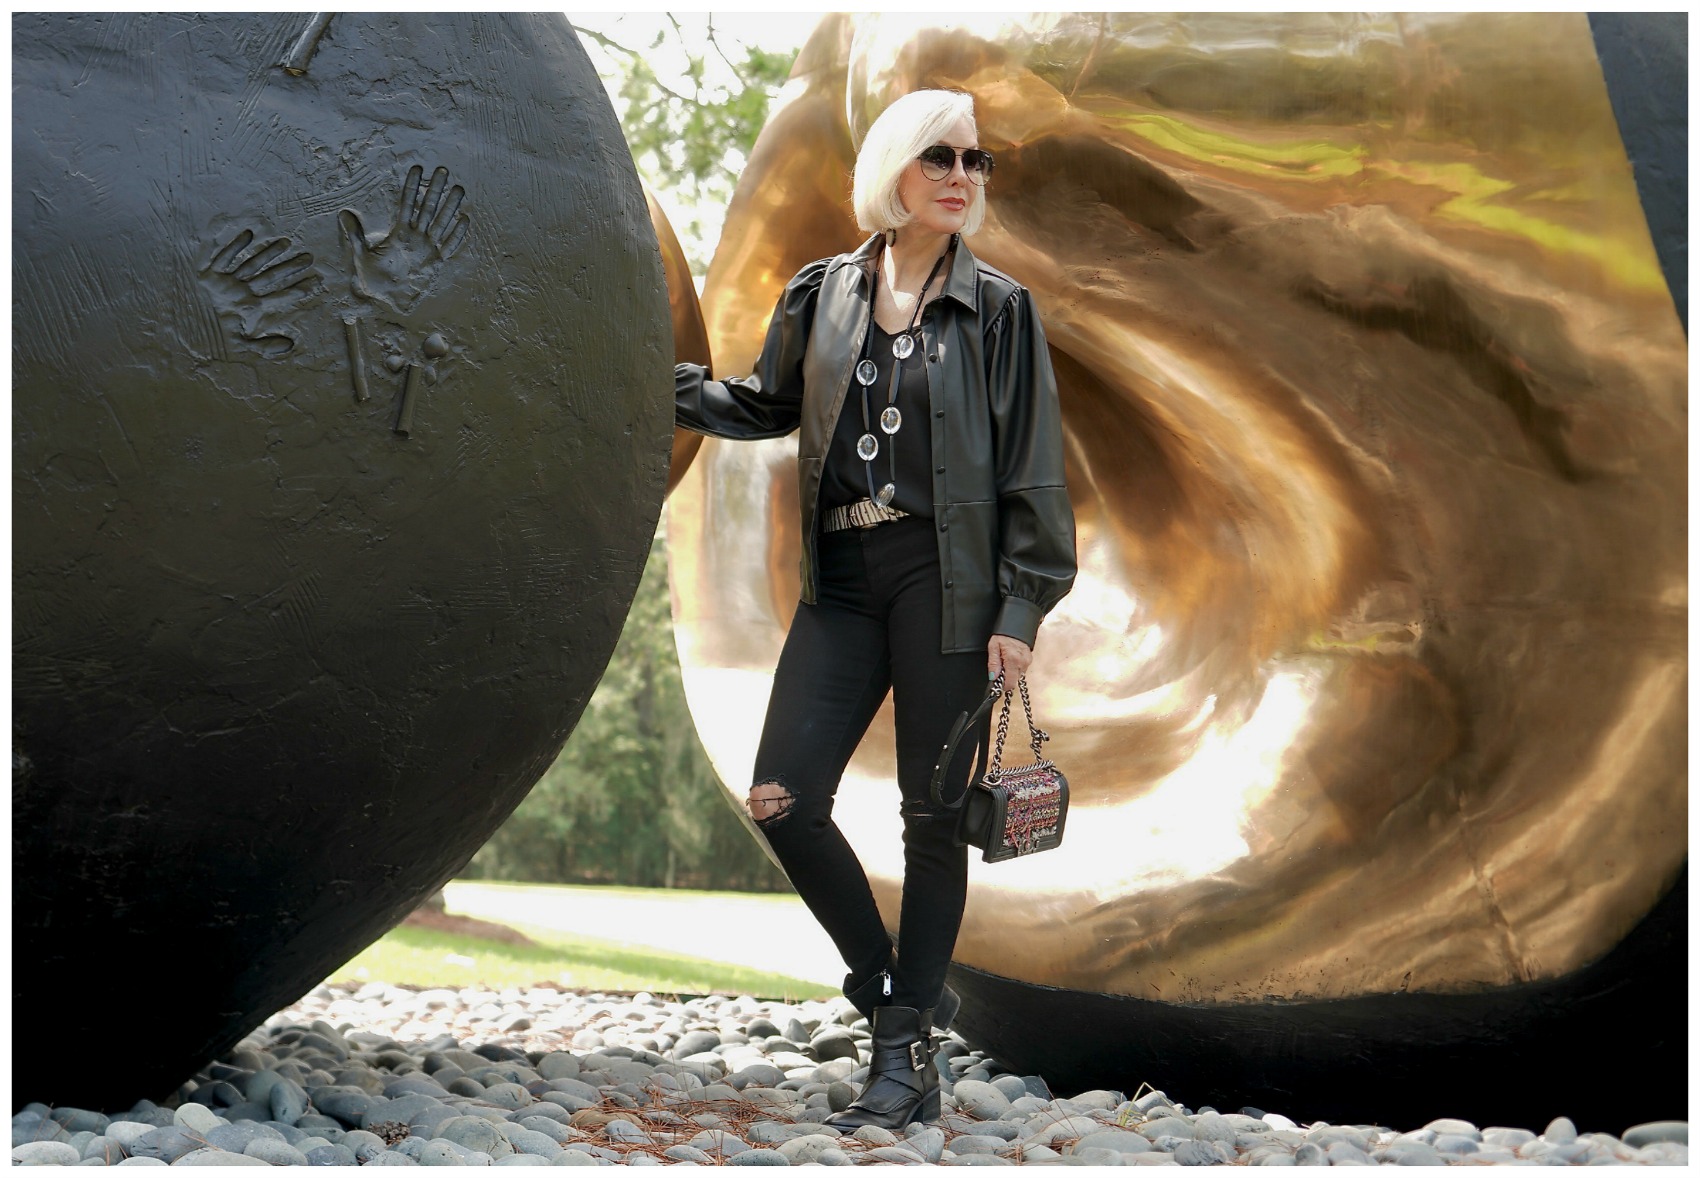 Sheree Frede of the SheShe Show standing in front of an outdoor sculpture wearing a black faux leather shirt and jeans